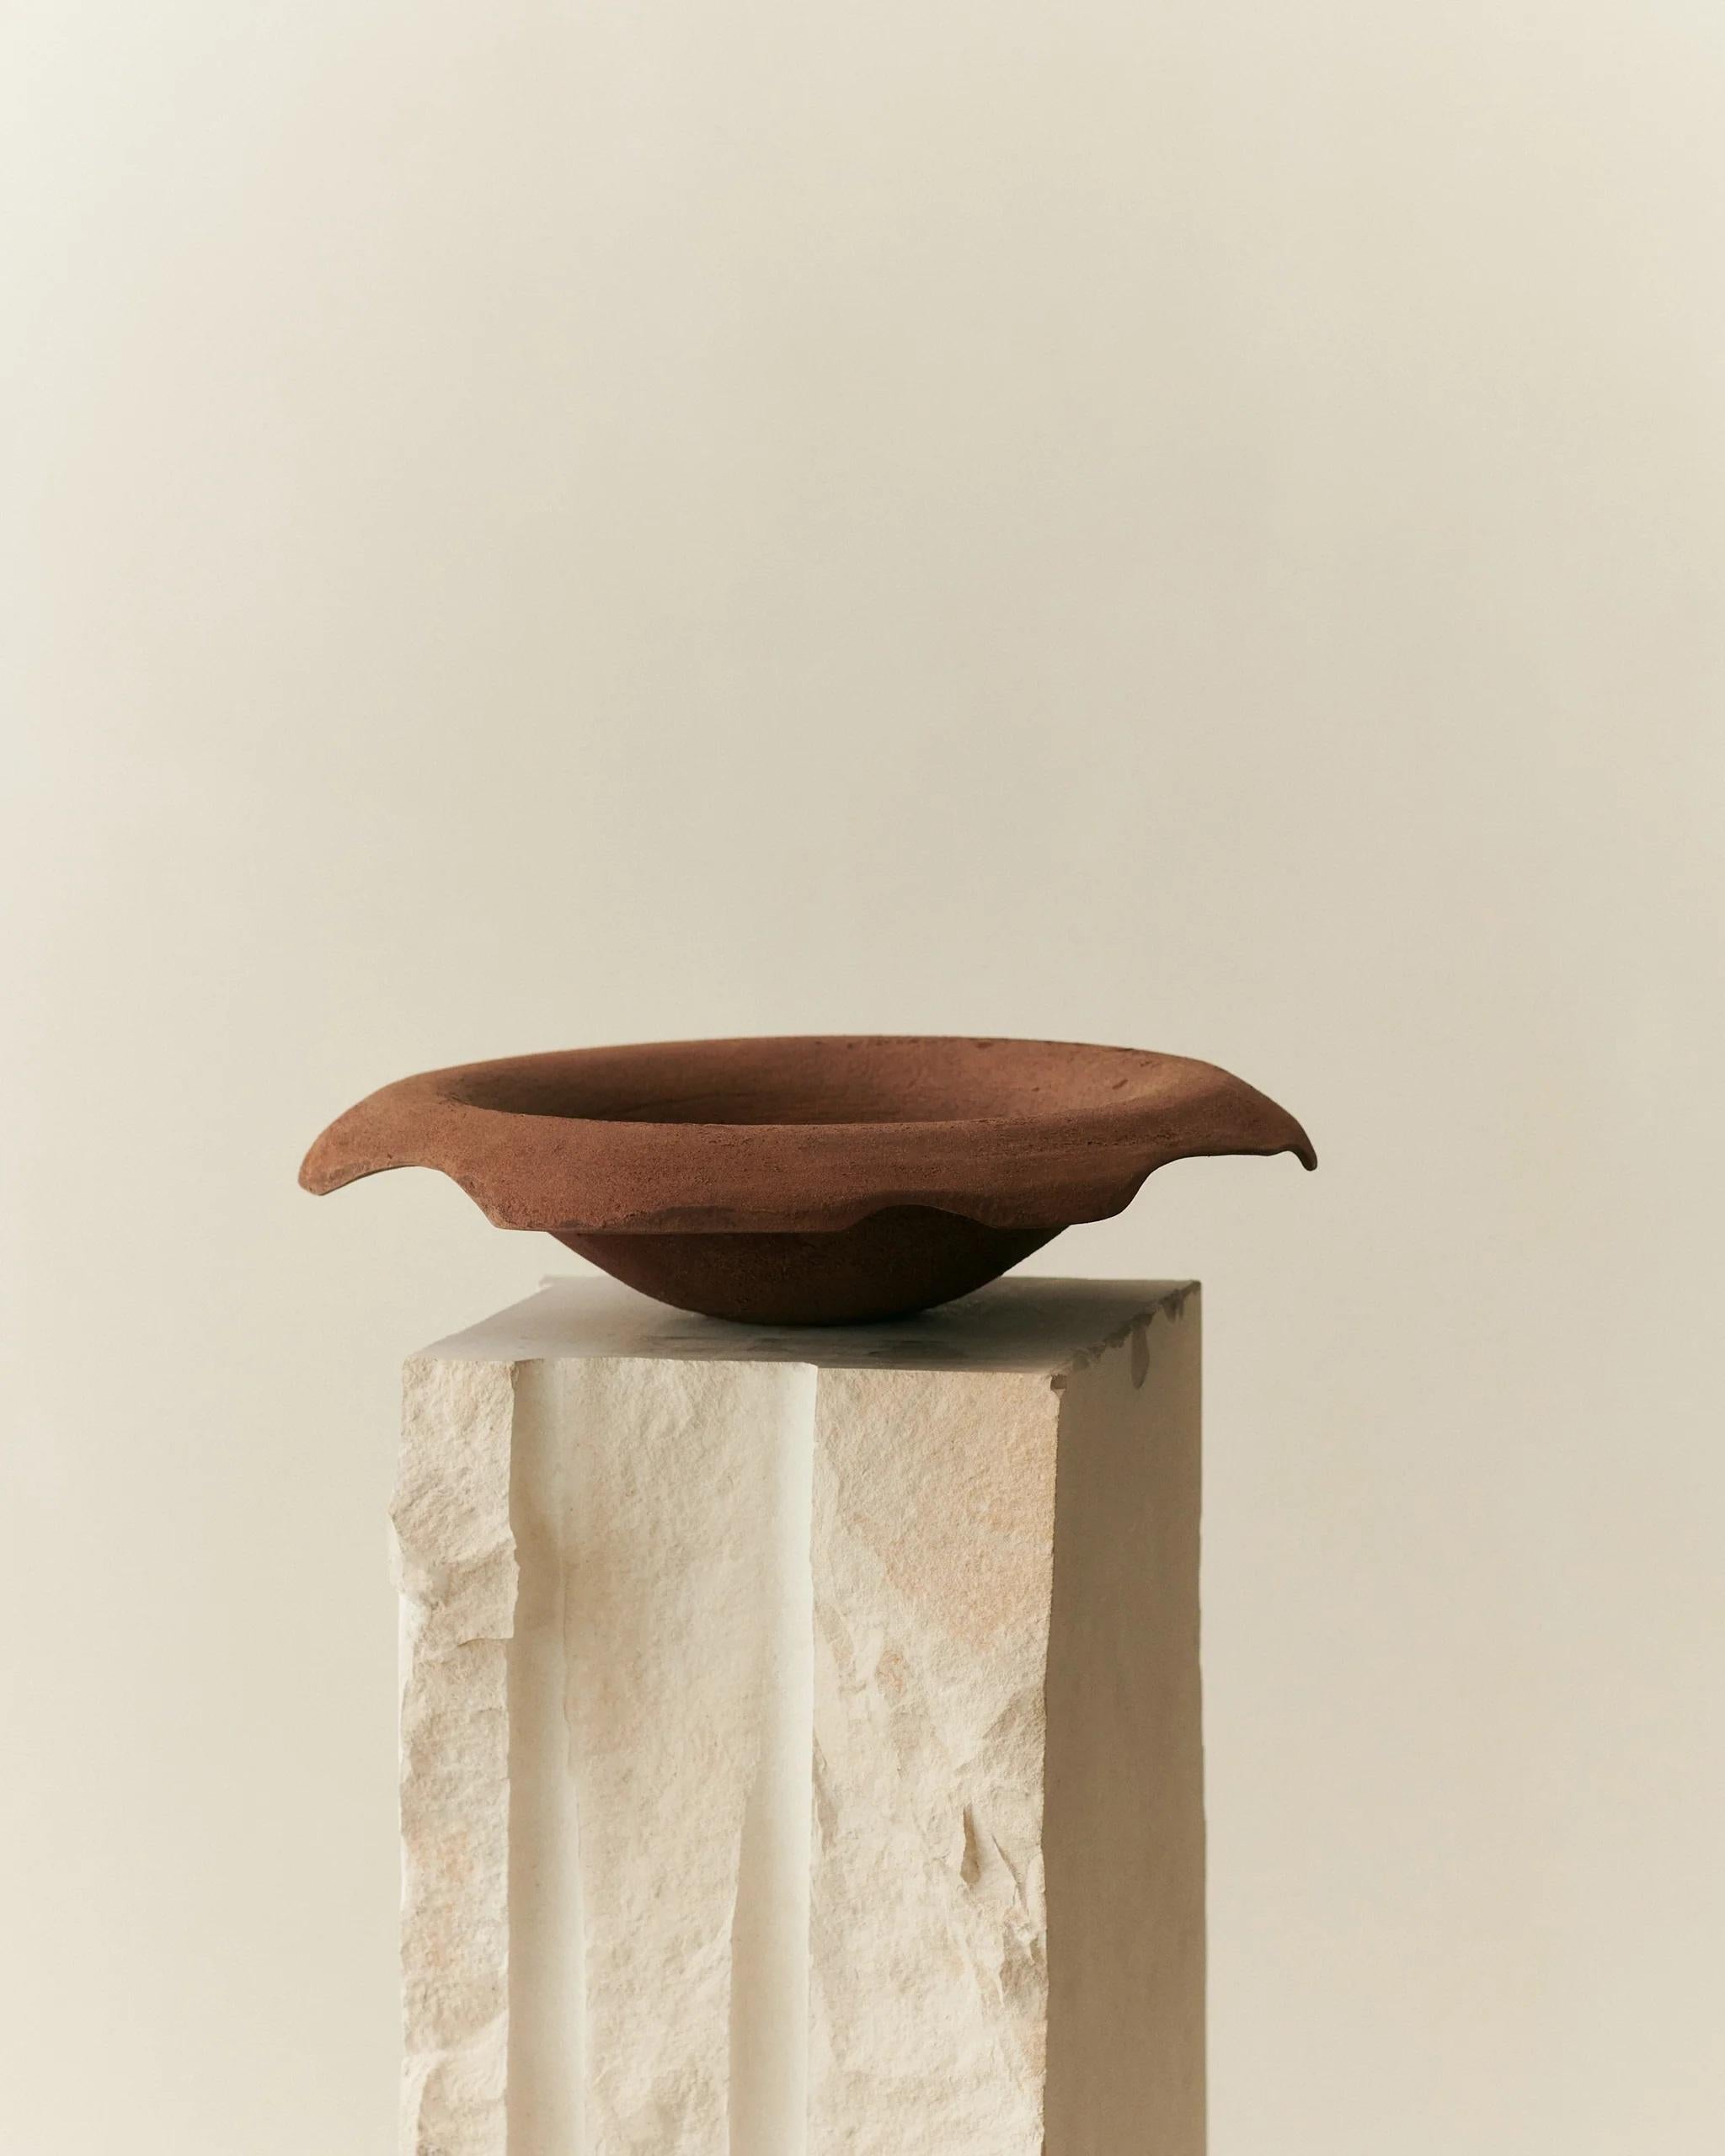 Collar Object 007 by Louise Roe
Dimensions: Ø 48 x H 12,5 cm.
Materials: Cast iron.

THE ROE STUDIO COLLAR OBJECT 007
Hand-welded from casted iron, our Collar Object 007 parades an intriguingly crude facade. Radiating hues of amber and bronze, this